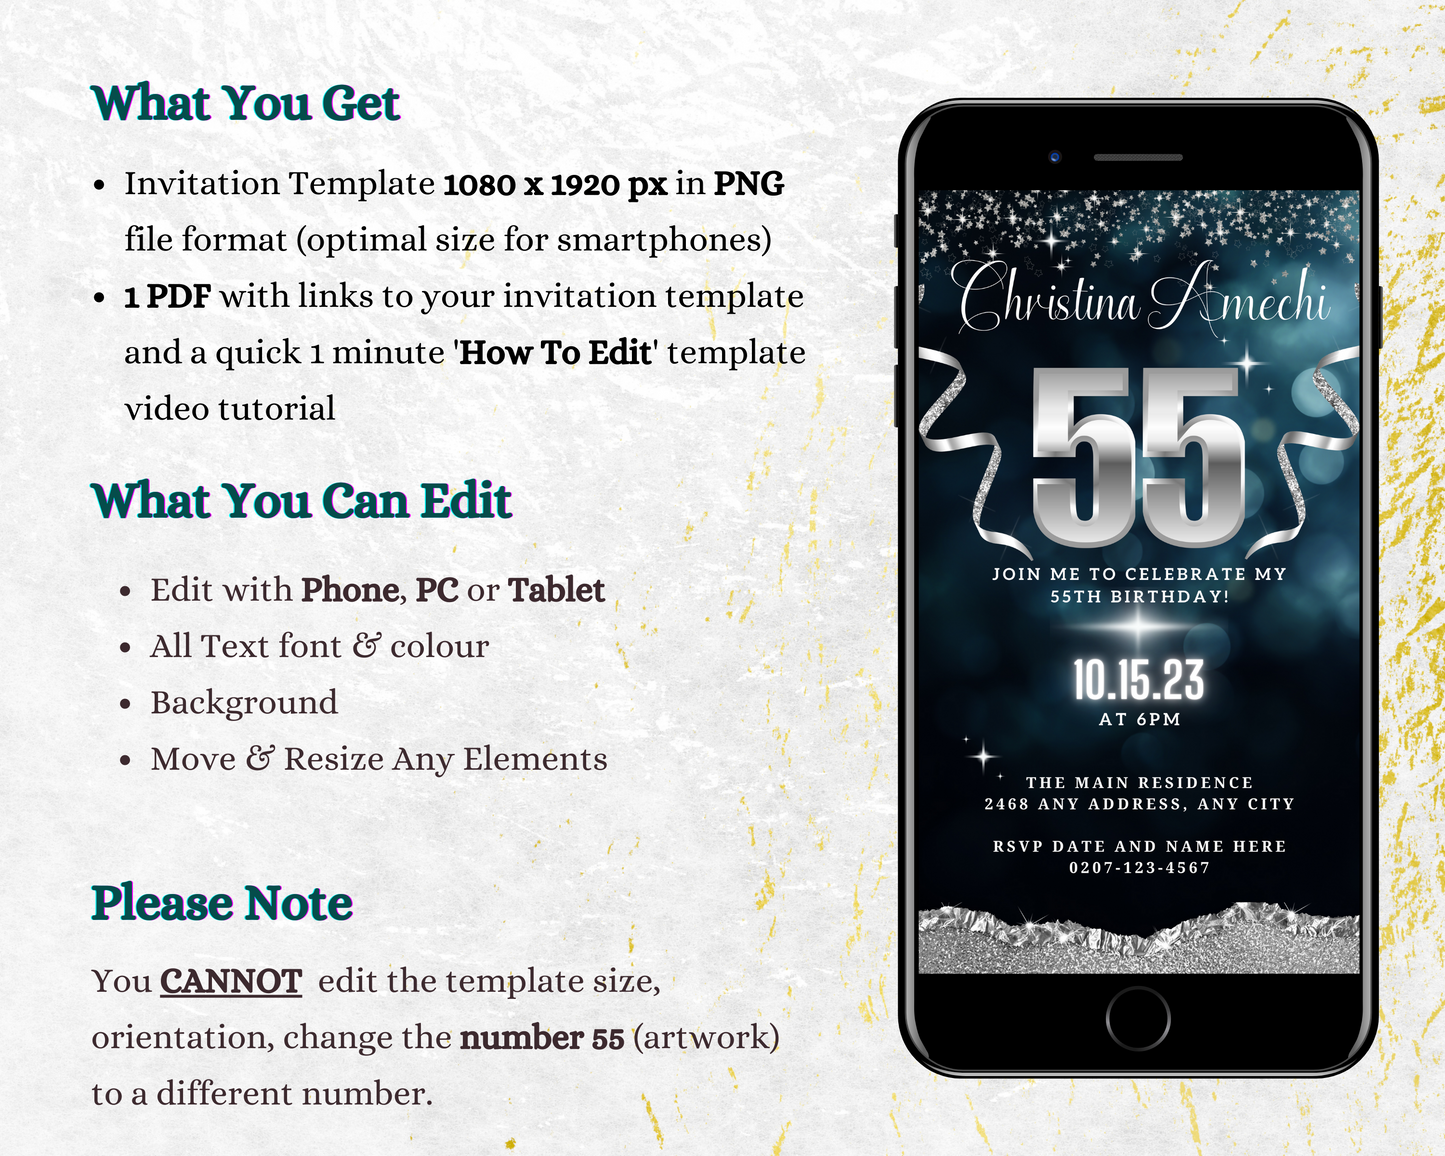 Customisable Navy Blue Silver Glitter 55th Birthday Evite displayed on a smartphone screen, ready for personalization using the Canva design app.